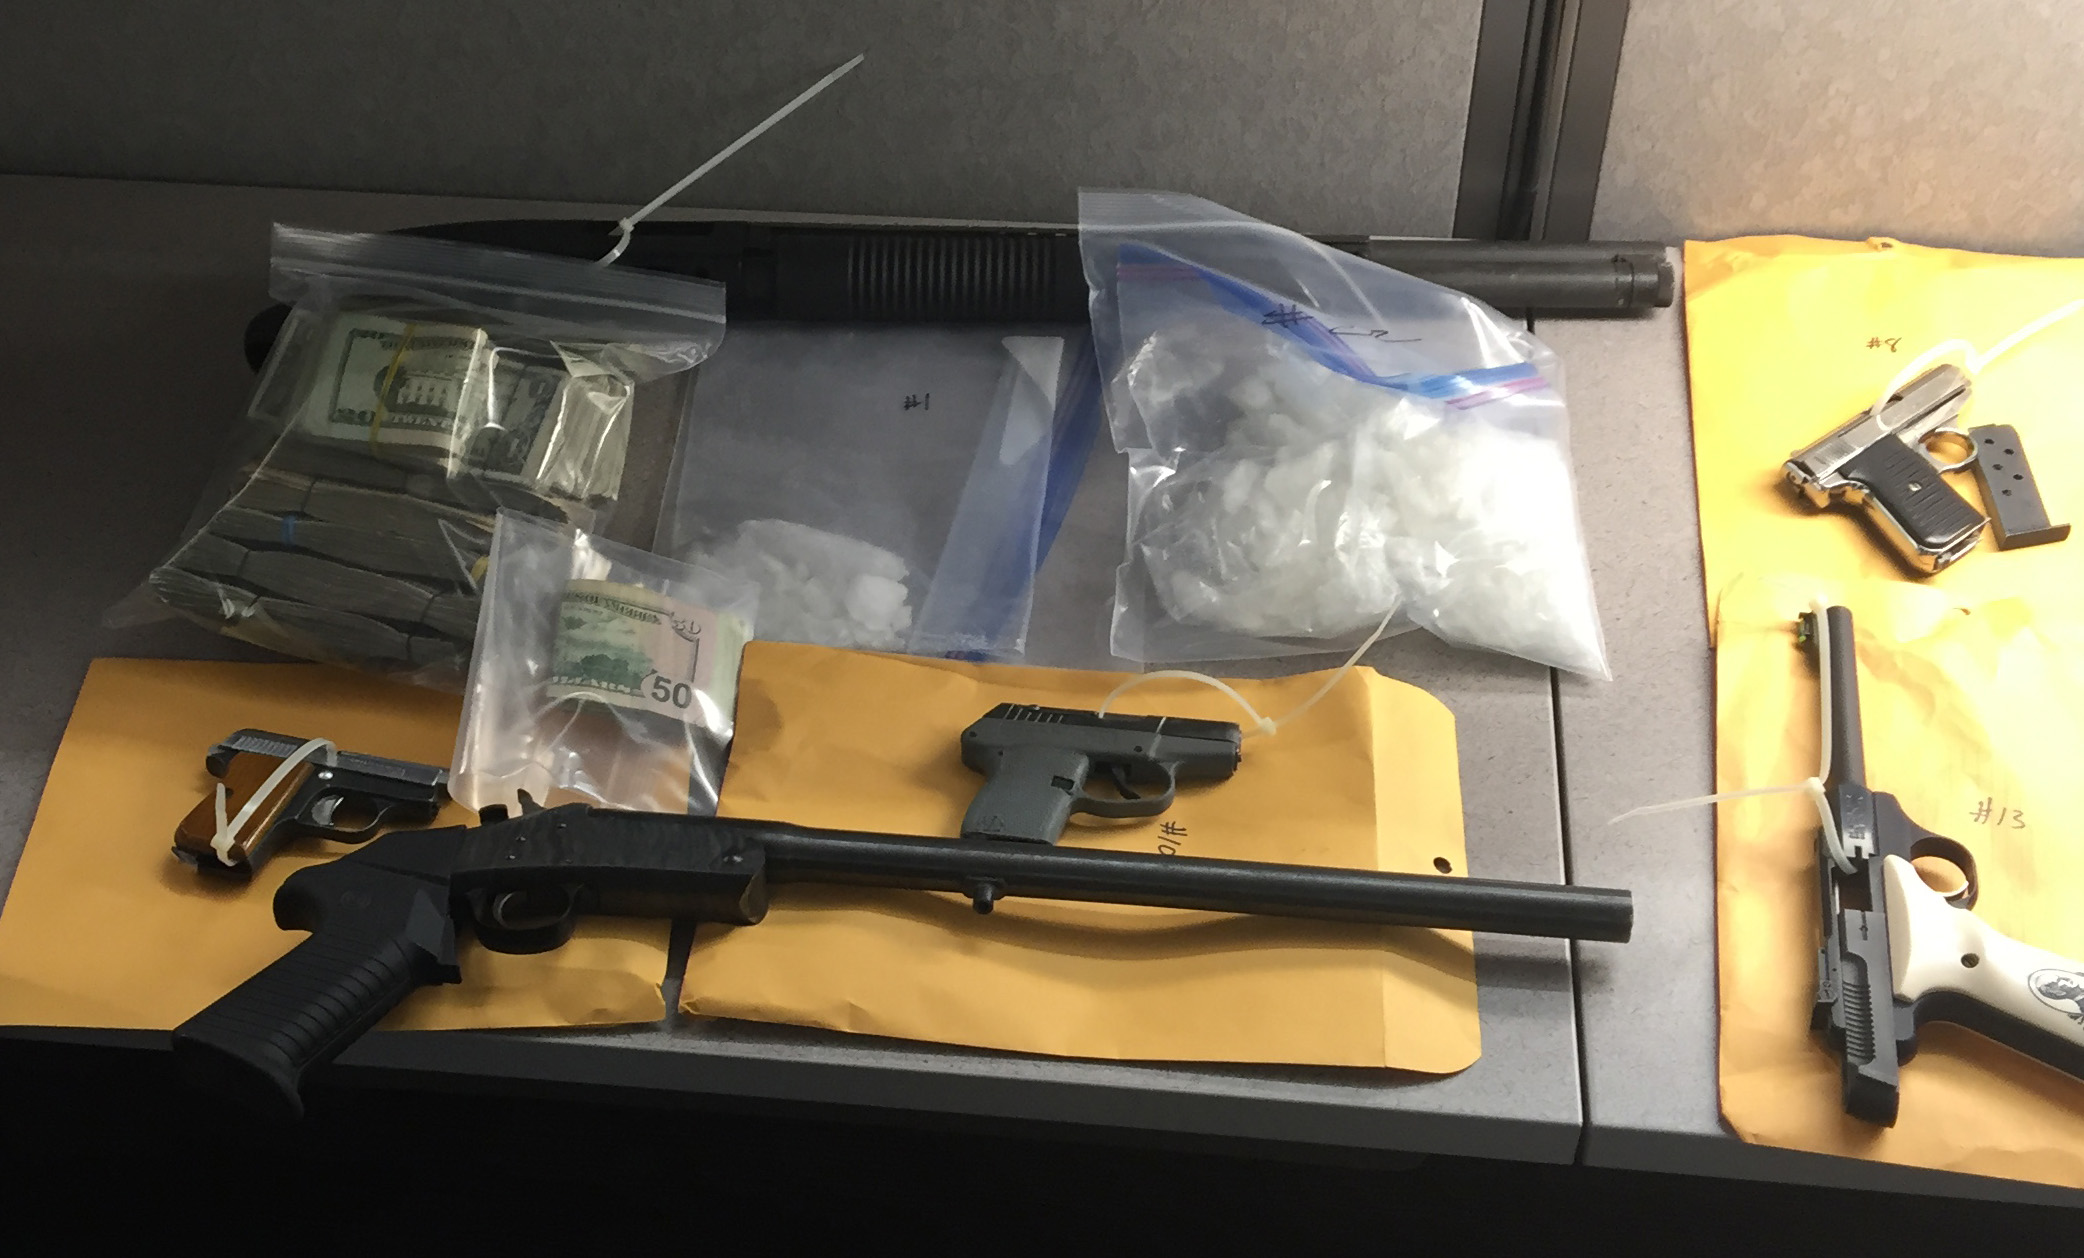 Law enforcement officers recovered more than 3 pounds of methamphetamine, some heroin and multiple illegally-owned firearms after two searches of the same man at the same Image neighborhood house this month.